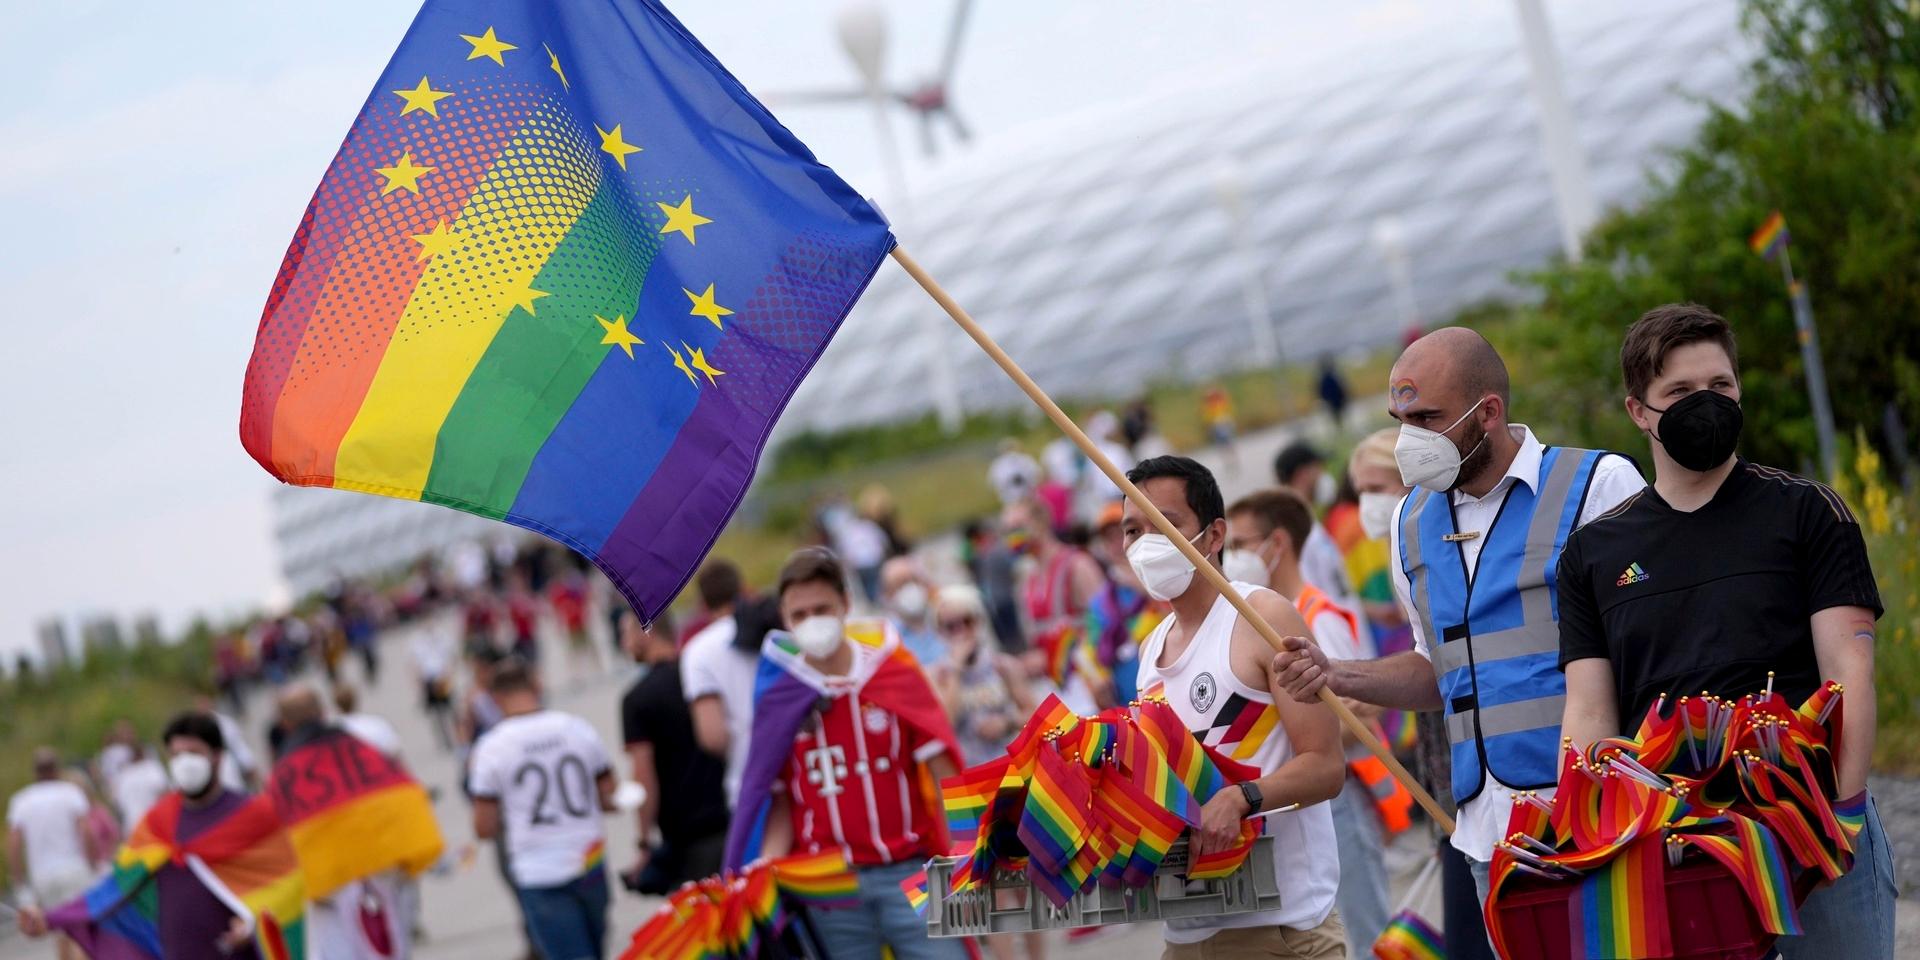 Football supporters are seen with LGBT pride flags outside of the stadium before the Euro 2020 soccer championship group F match between Germany and Hungary at the Allianz Arena in Munich, Germany,Wednesday, June 23, 2021. (AP Photo/Matthias Schrader)  FAS106